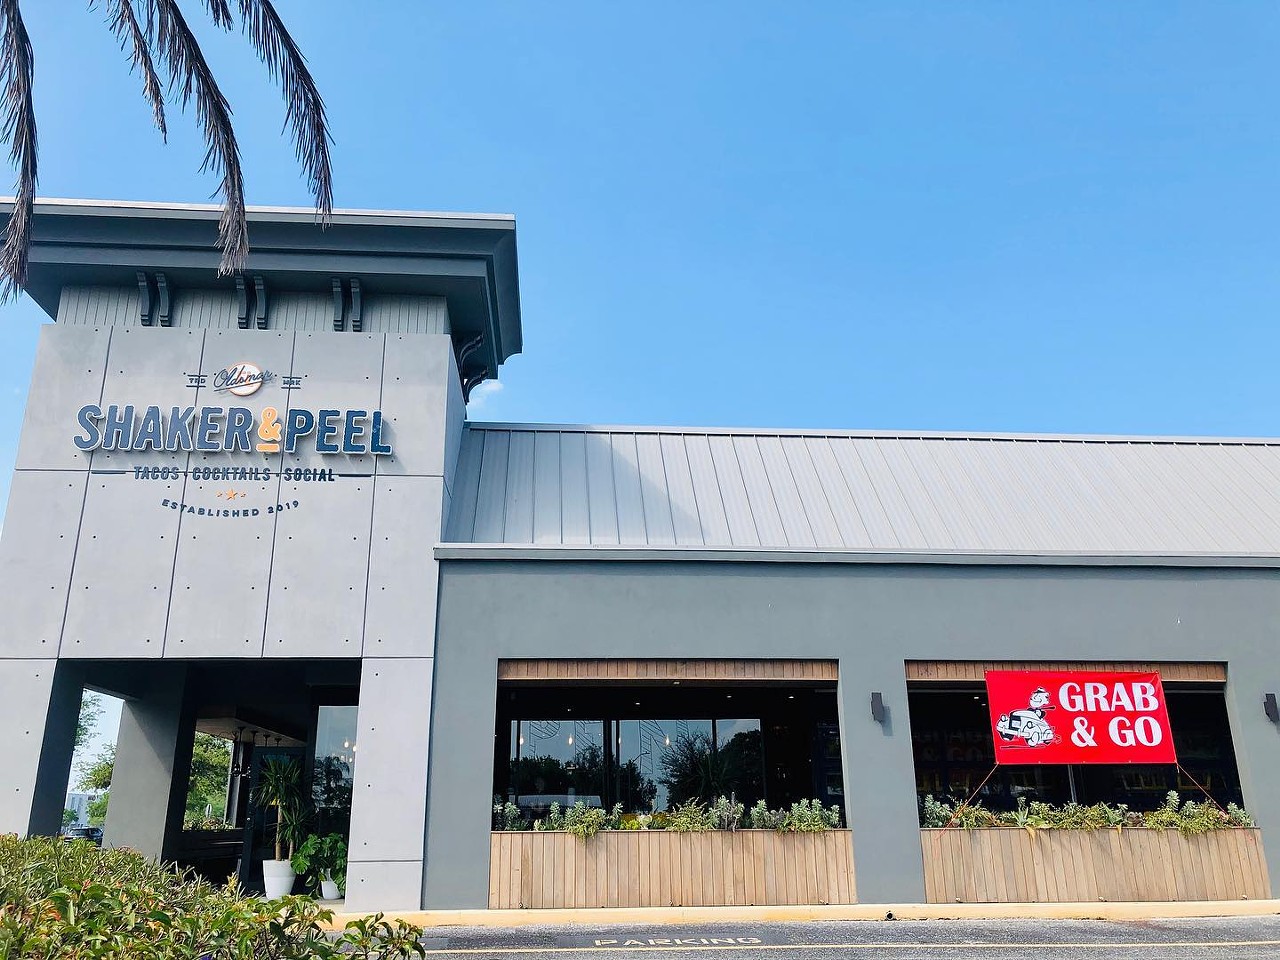 Shaker & Peel
3159 Curlew Rd., Oldsmar, 813-475-4712
With a focus on “the art of the taco”, this inventive Tex-Mex fusion restaurant wants to redesign your dining experience with the hand-held meal. It also offers everything from wok bowls to sangrias. 
Photo via Shaker & Pee/Facebook